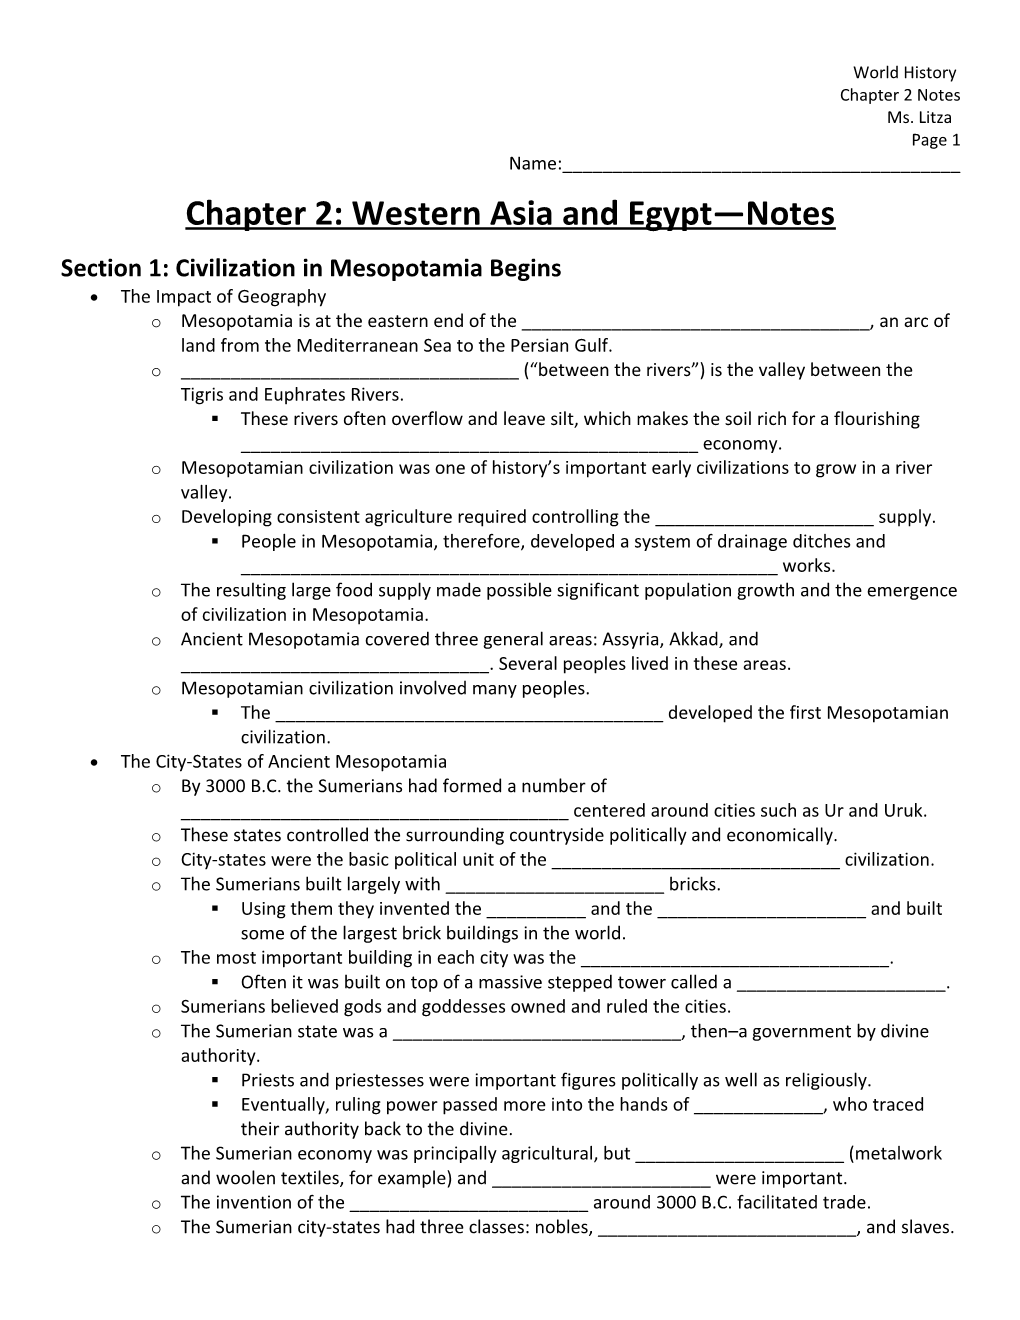 Chapter 2: Western Asia and Egypt Notes